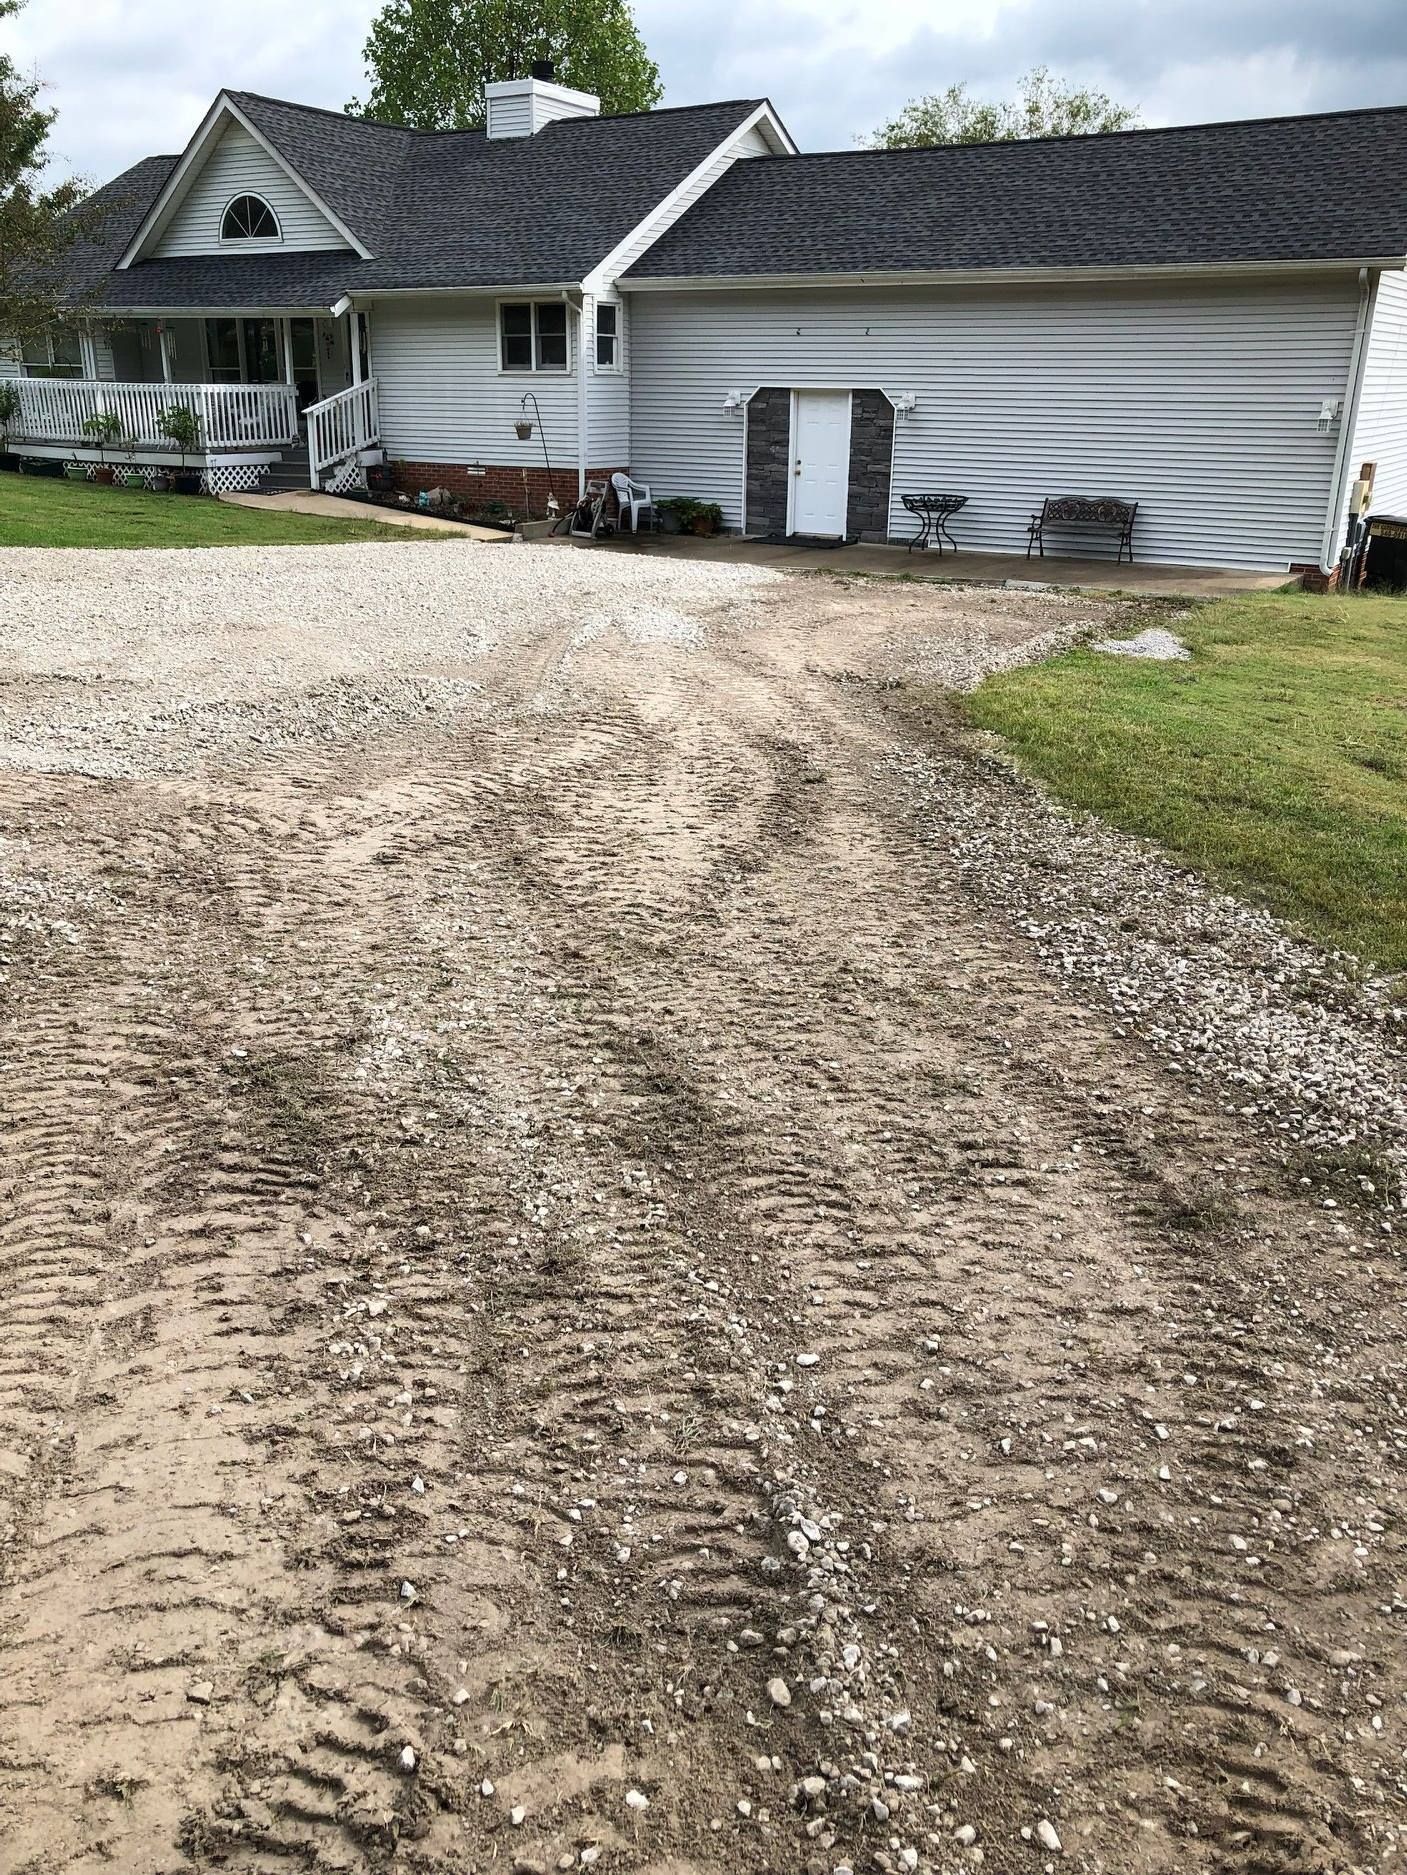 There is a dirt road leading to a house.